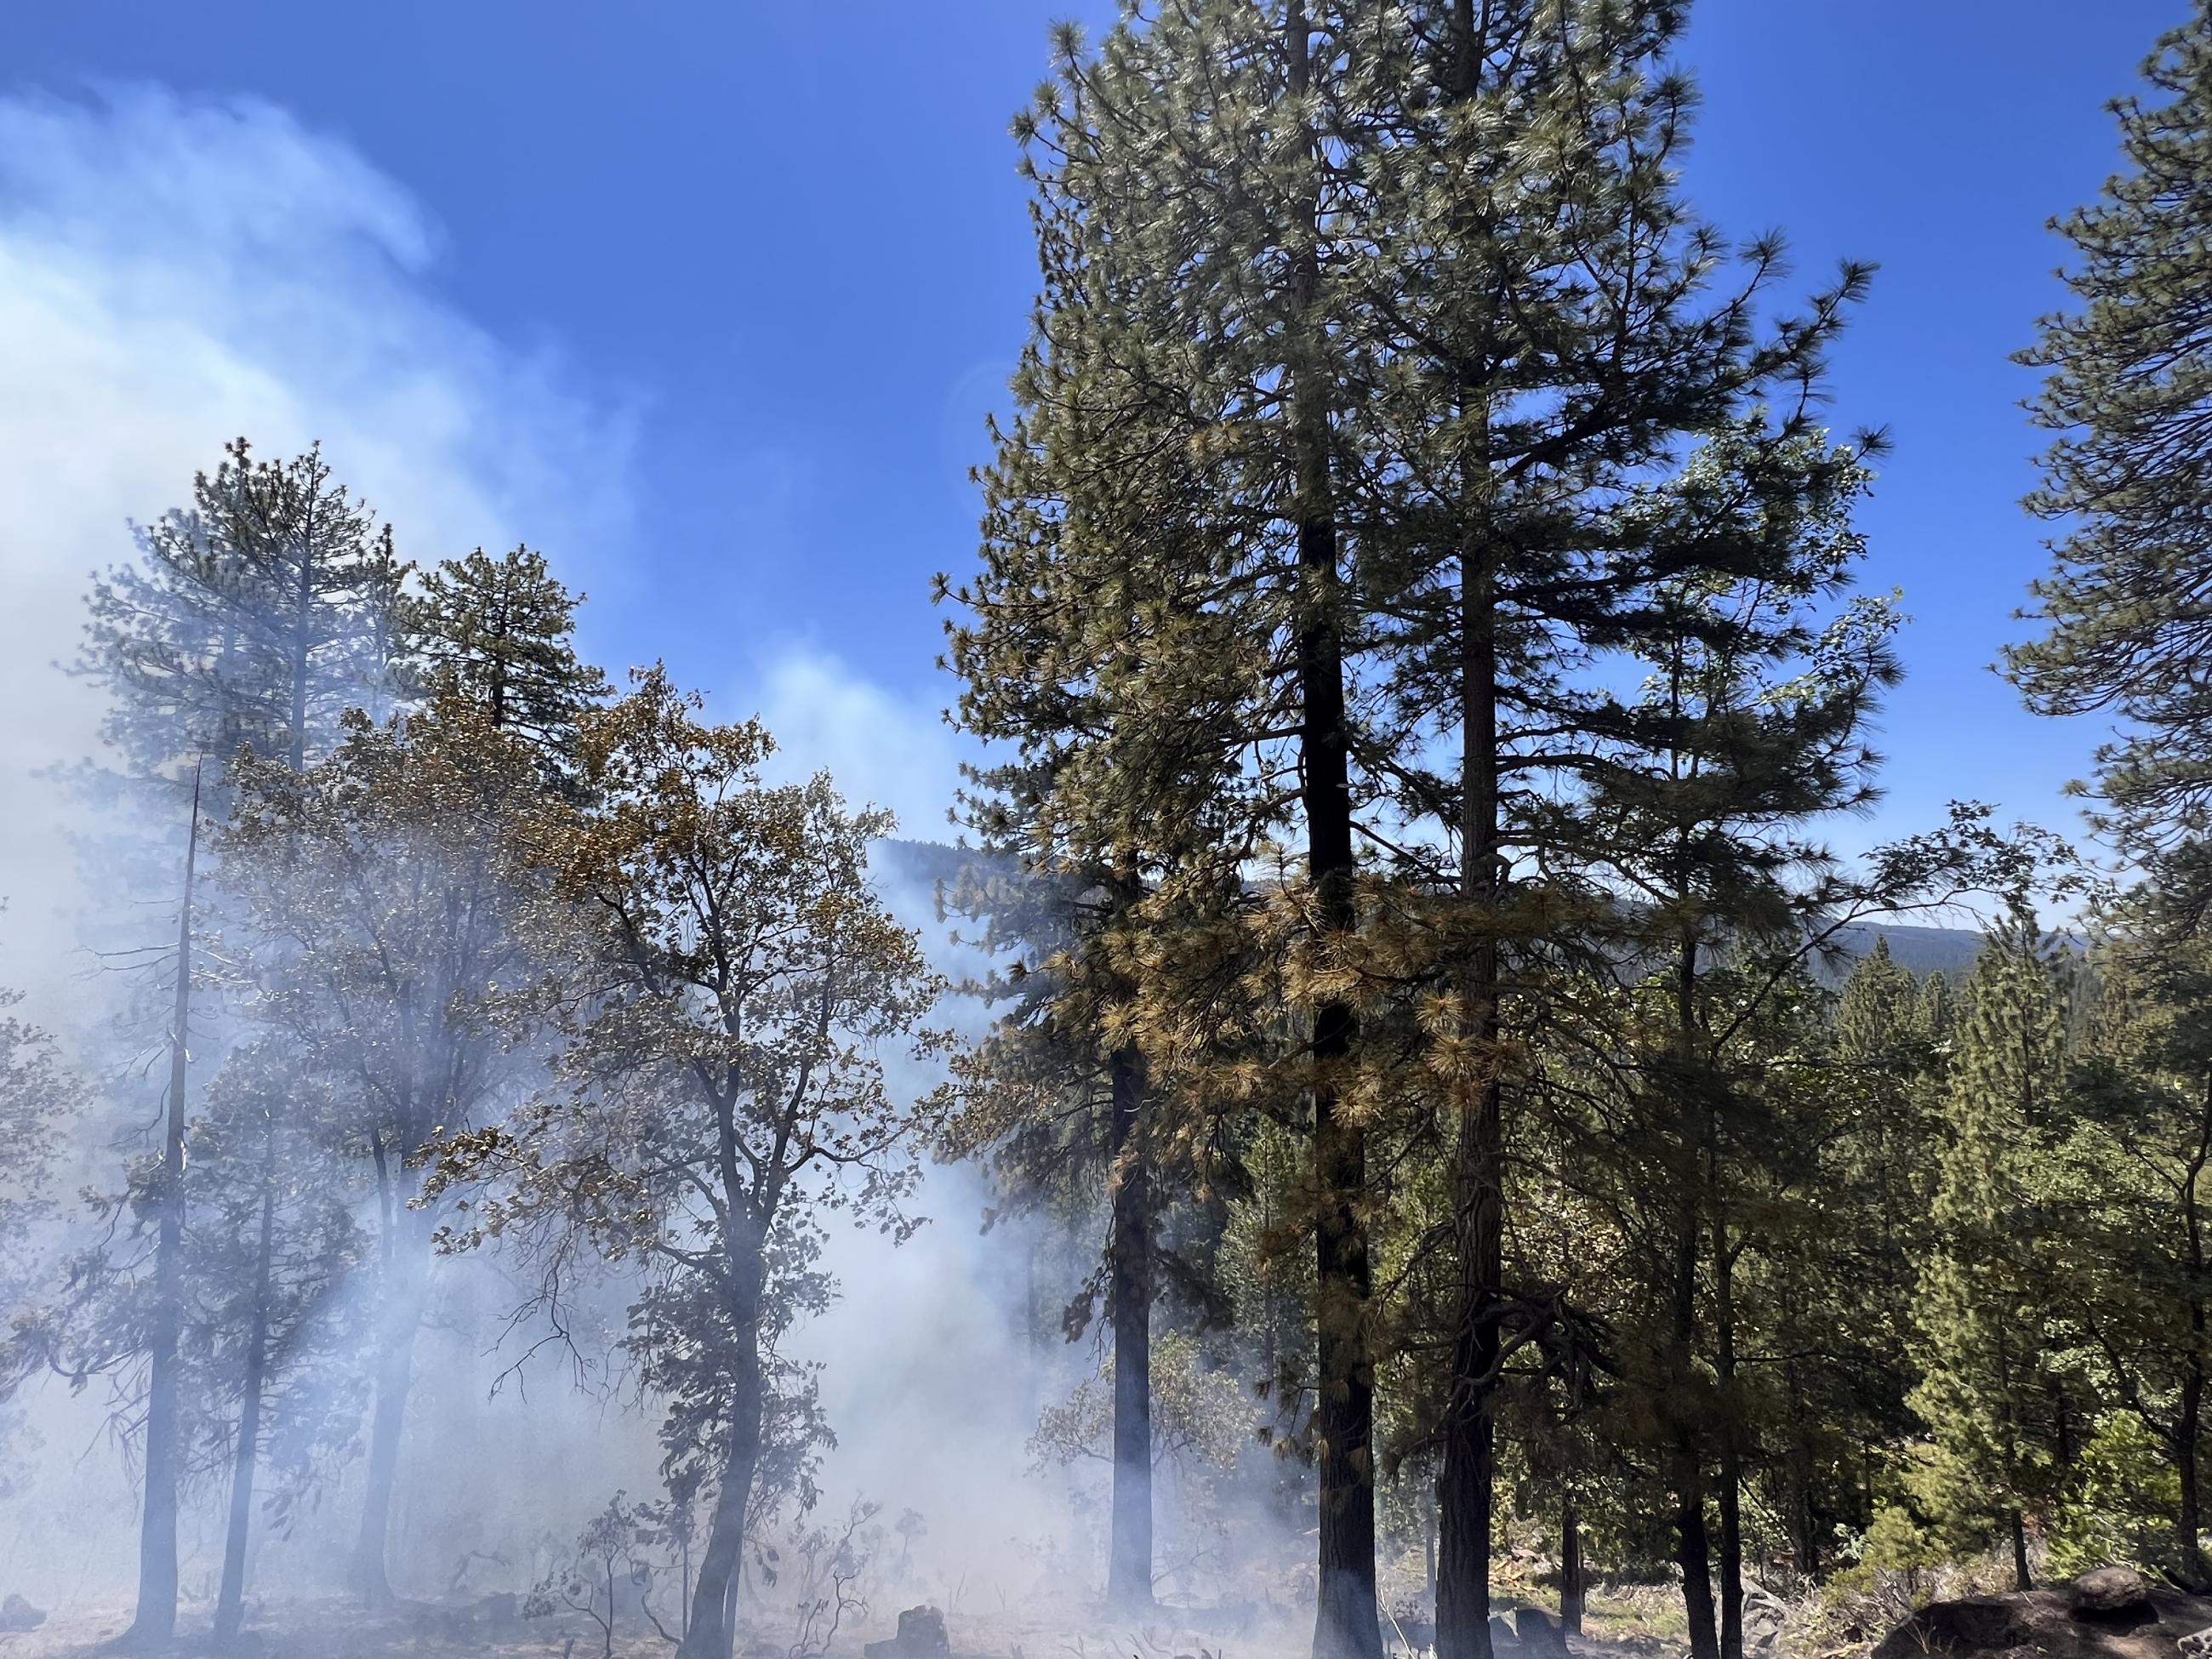 Strawberry prescribed burn along Crabtree Road. Left side of photo shows smoke column and burnt vegetation. Right of photo shows handline dug by firefighers to divide green unit on the right. 